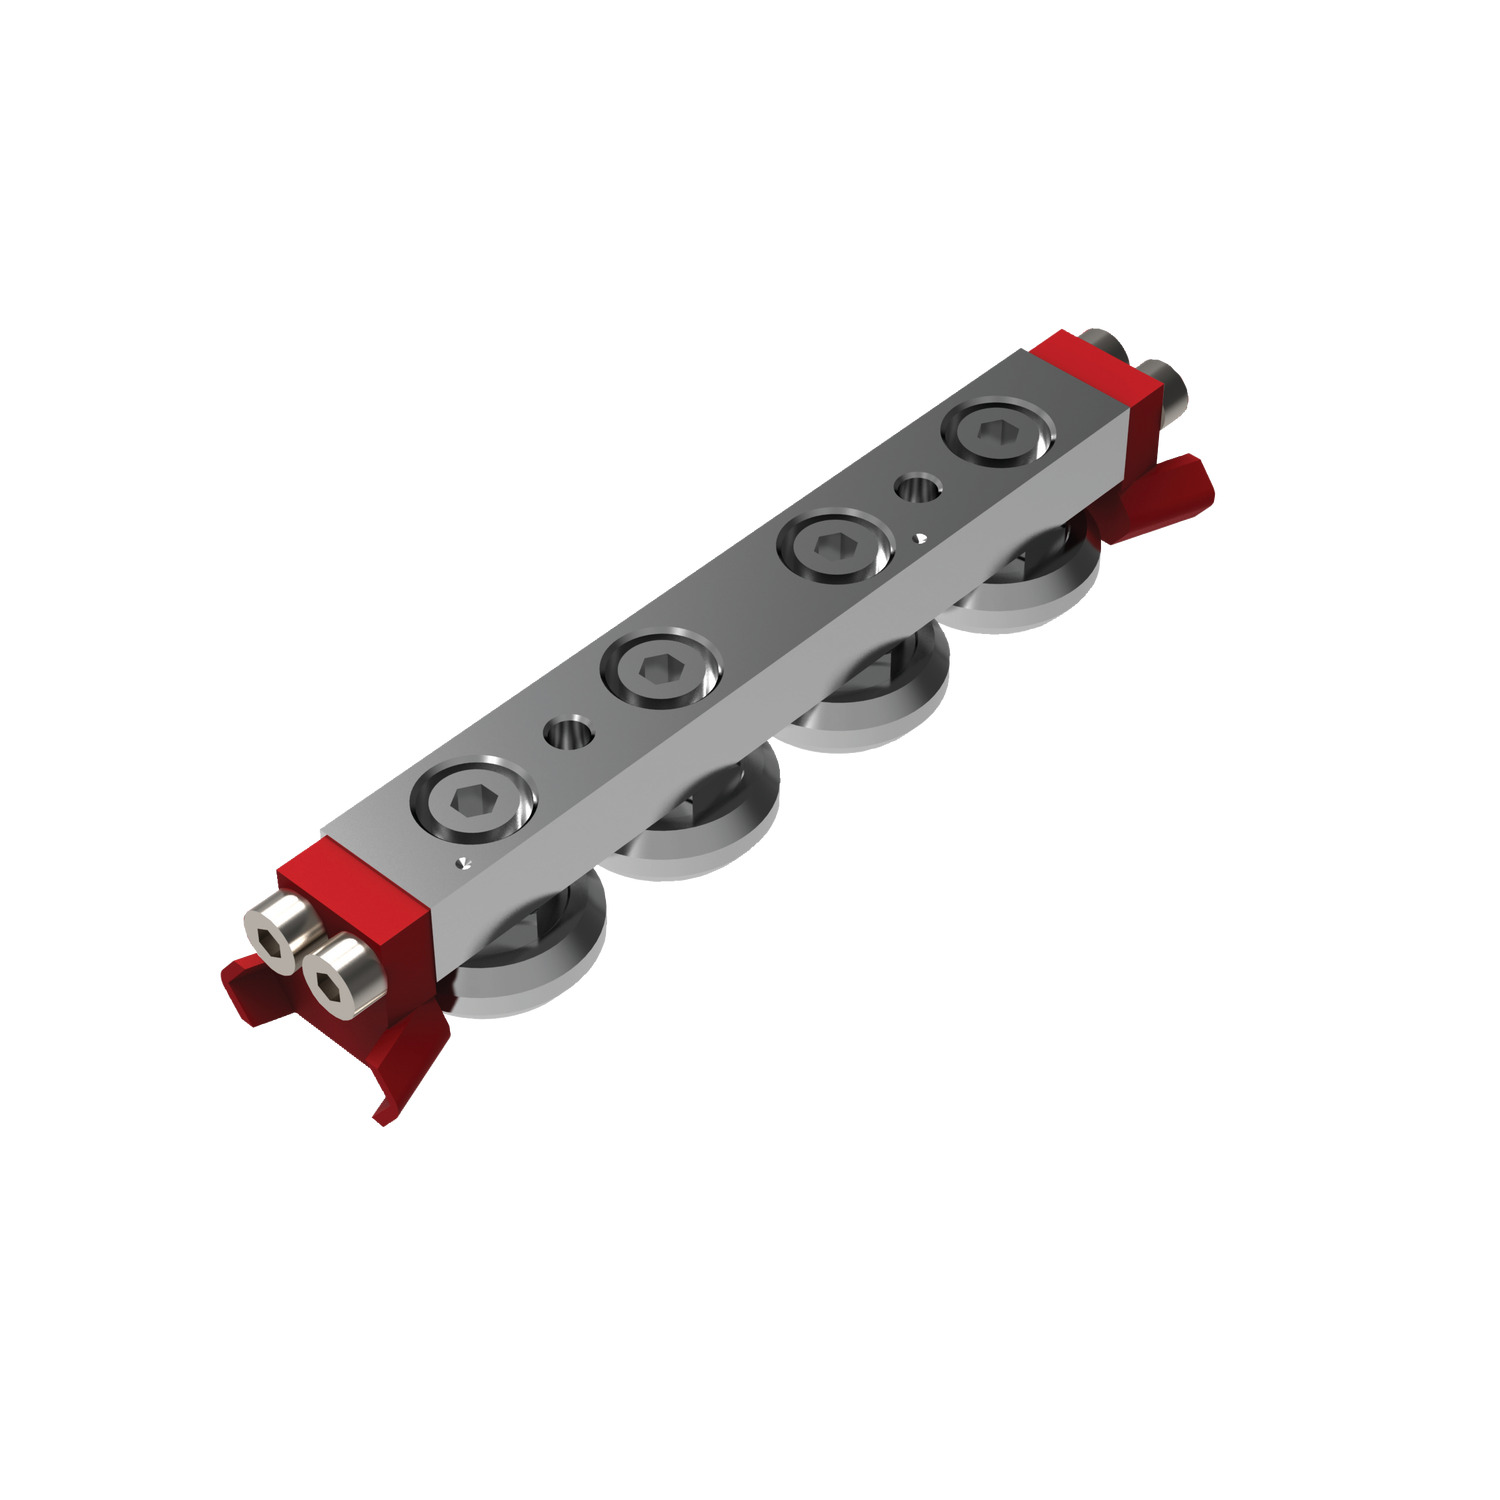 Light Duty Sliders - Size 18 Light duty, compact rail sliders with rubber seals.